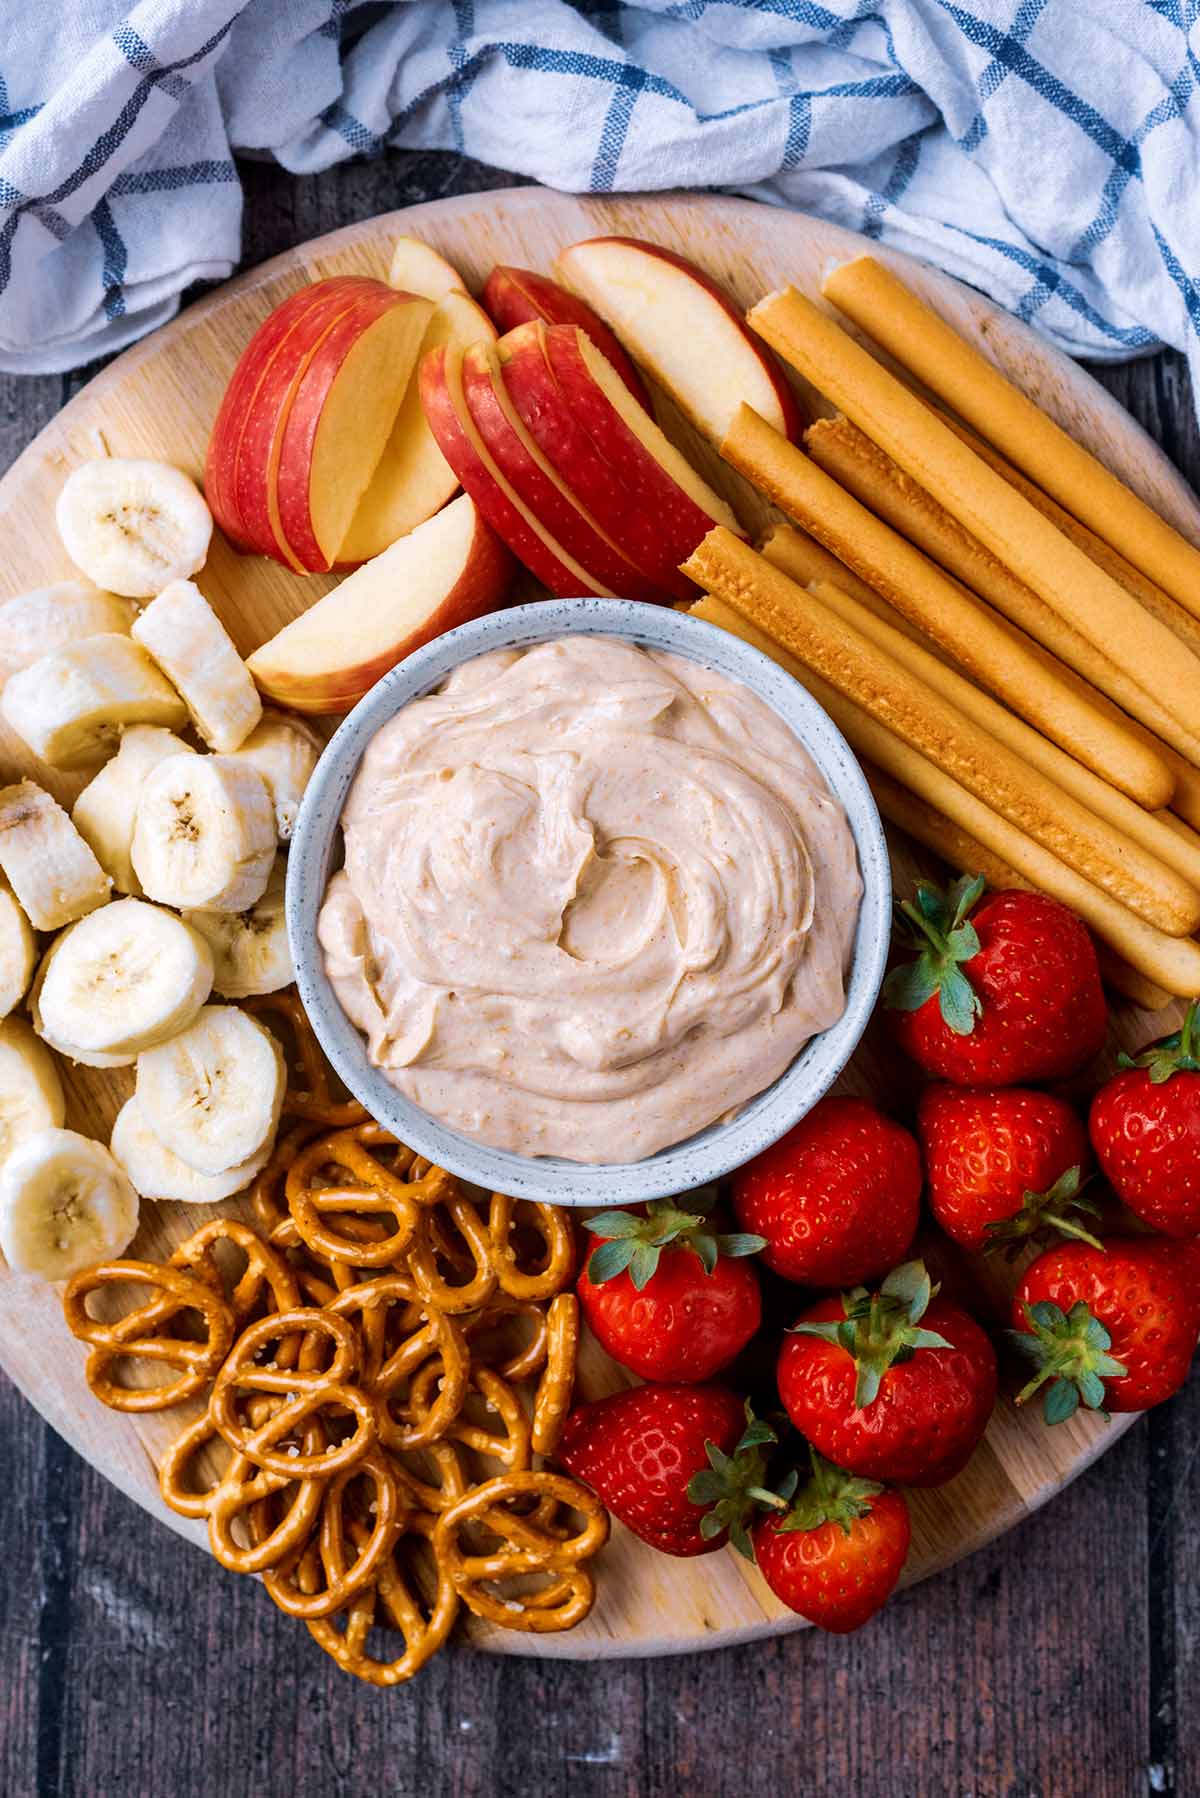 A bowl of dip surrounded by bread sticks, pretzels, strawberries, banana slices and apple slices.